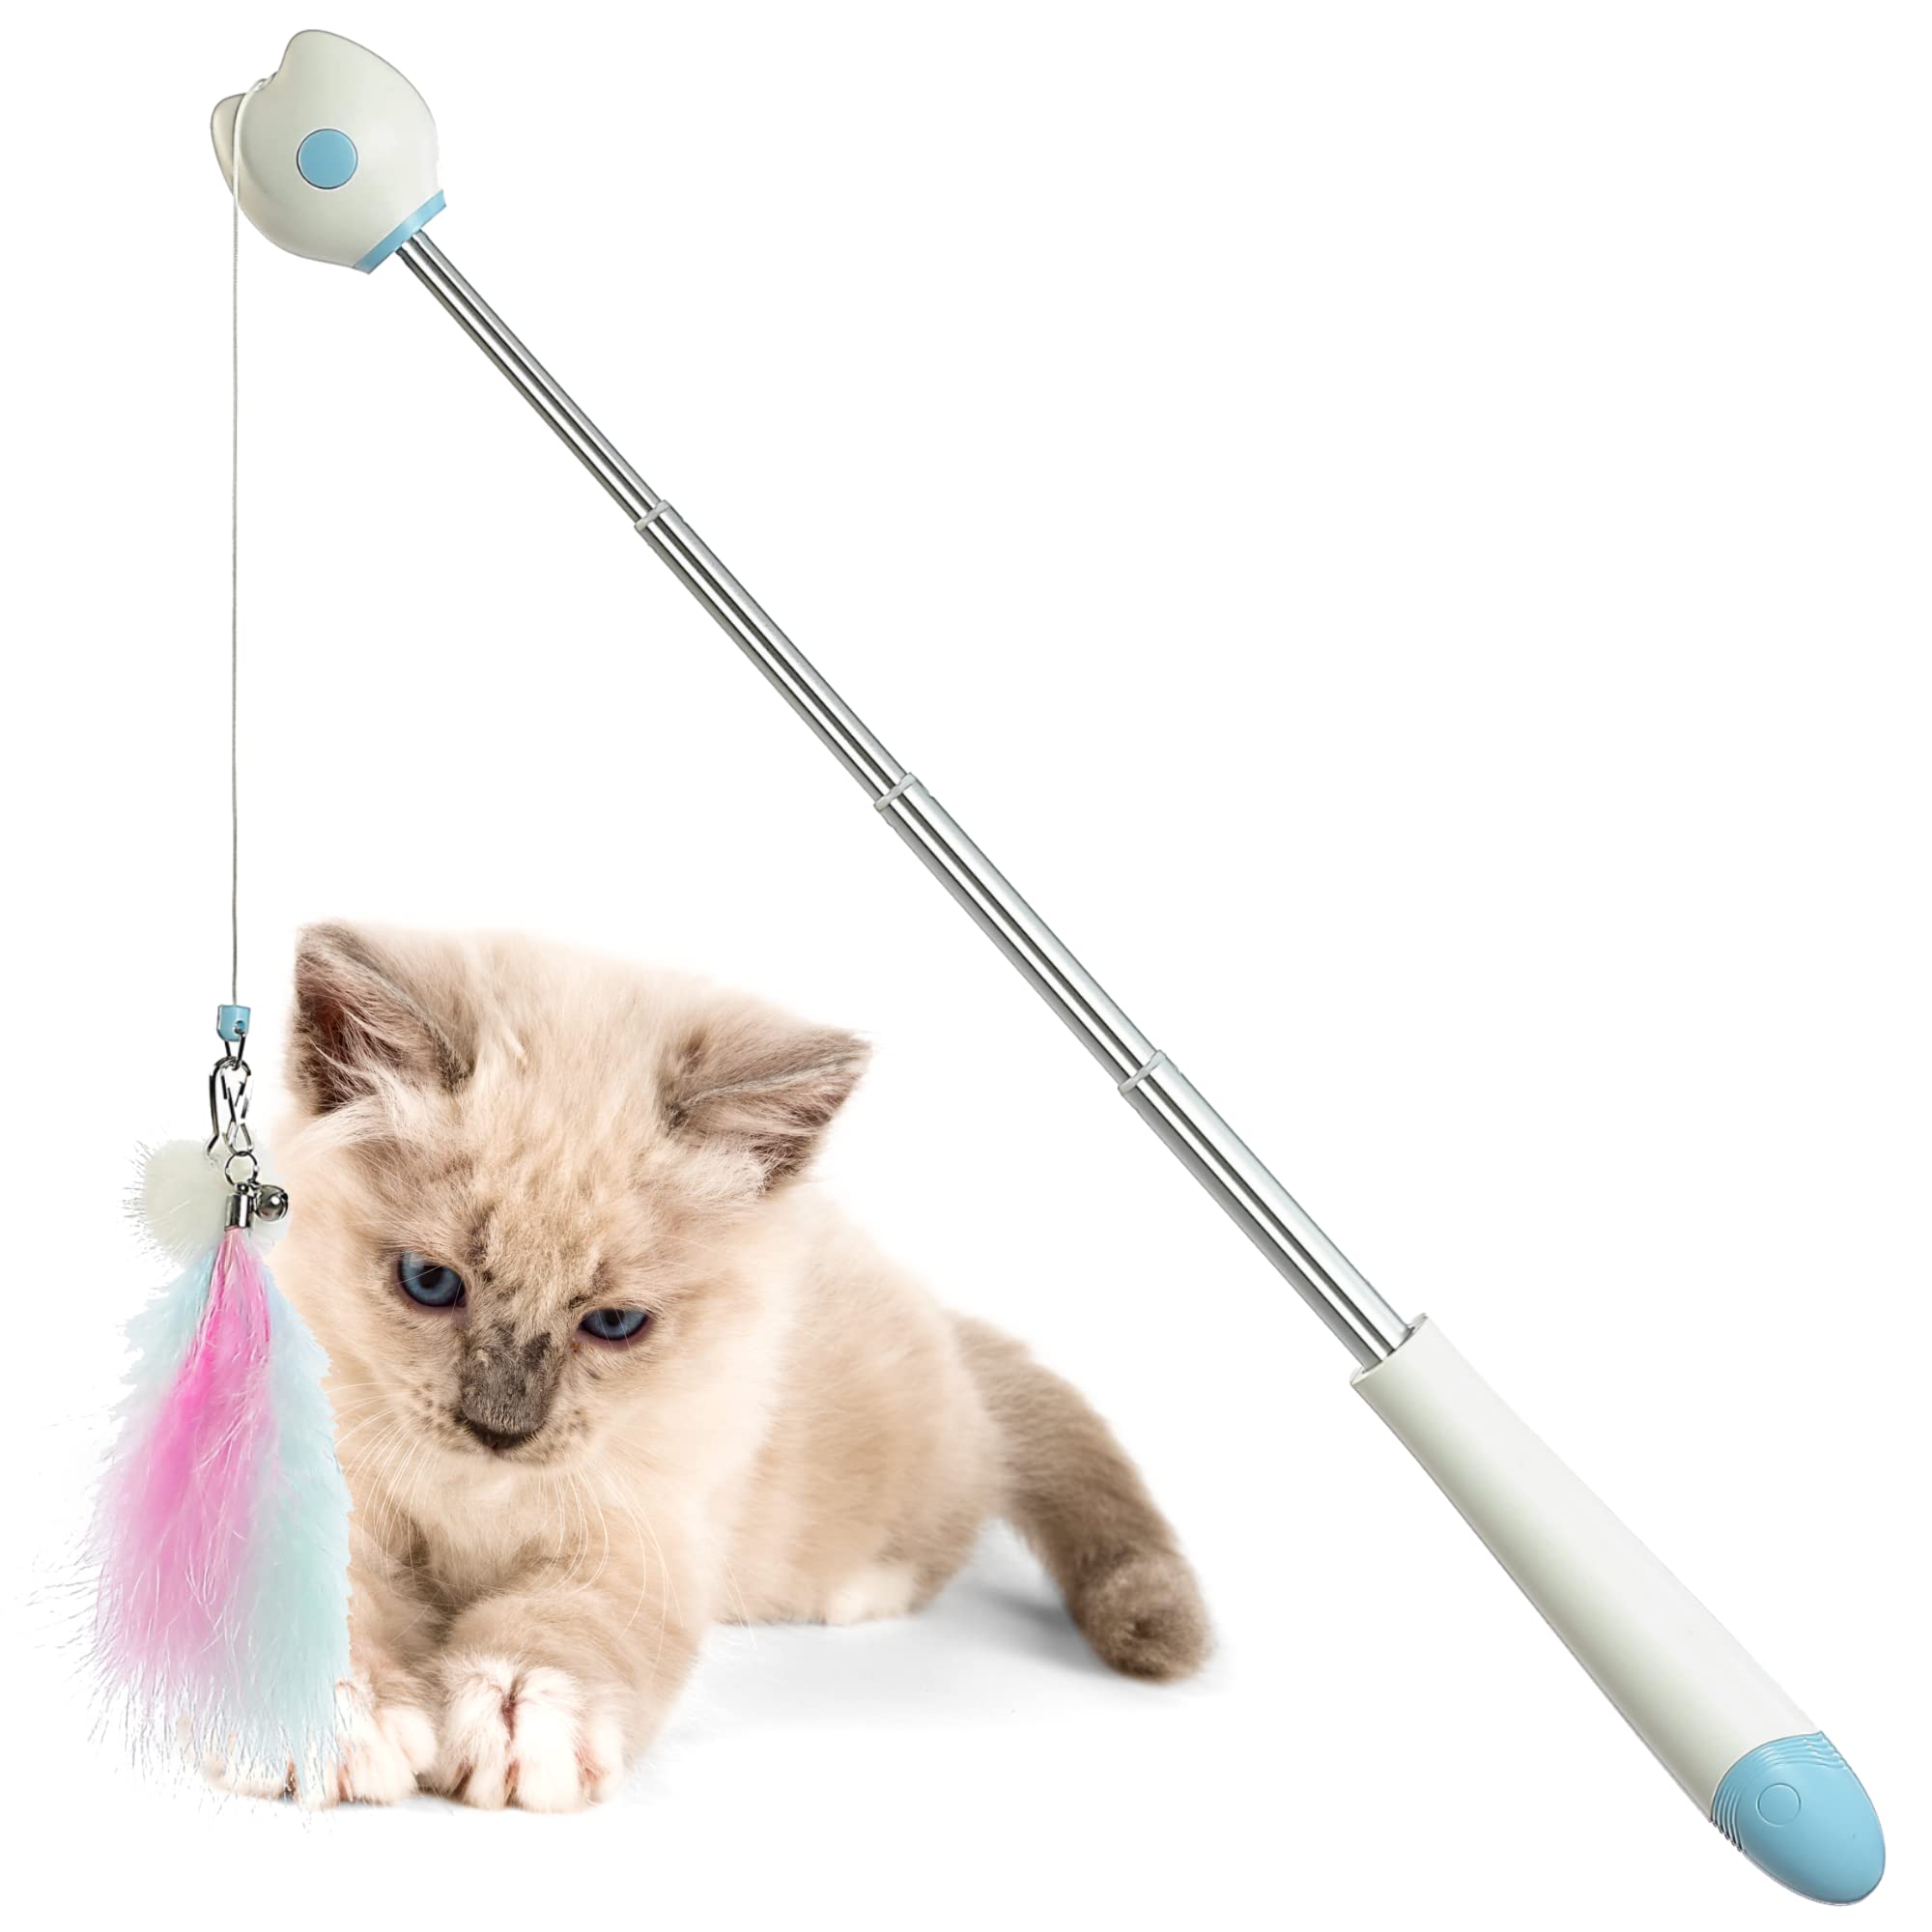 Fishing Pole for Cats, Fishing Rod With Ball, Cat Teaser Toy, Cat